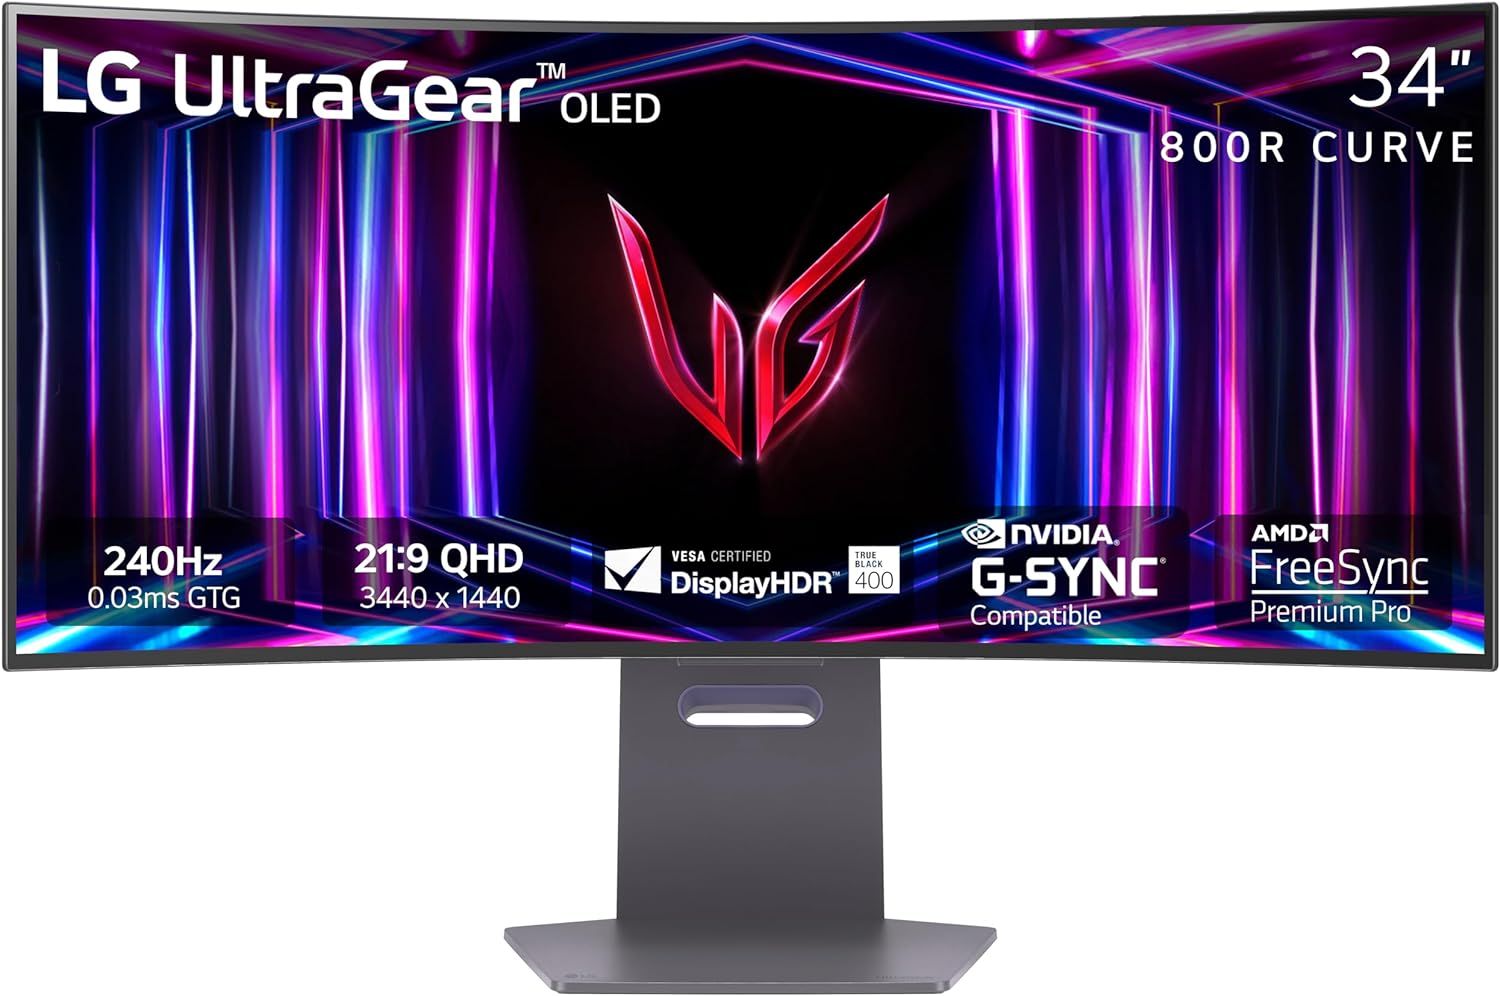 LG 34GS95QE 34-inch Ultragear OLED Curved Gaming Monitor